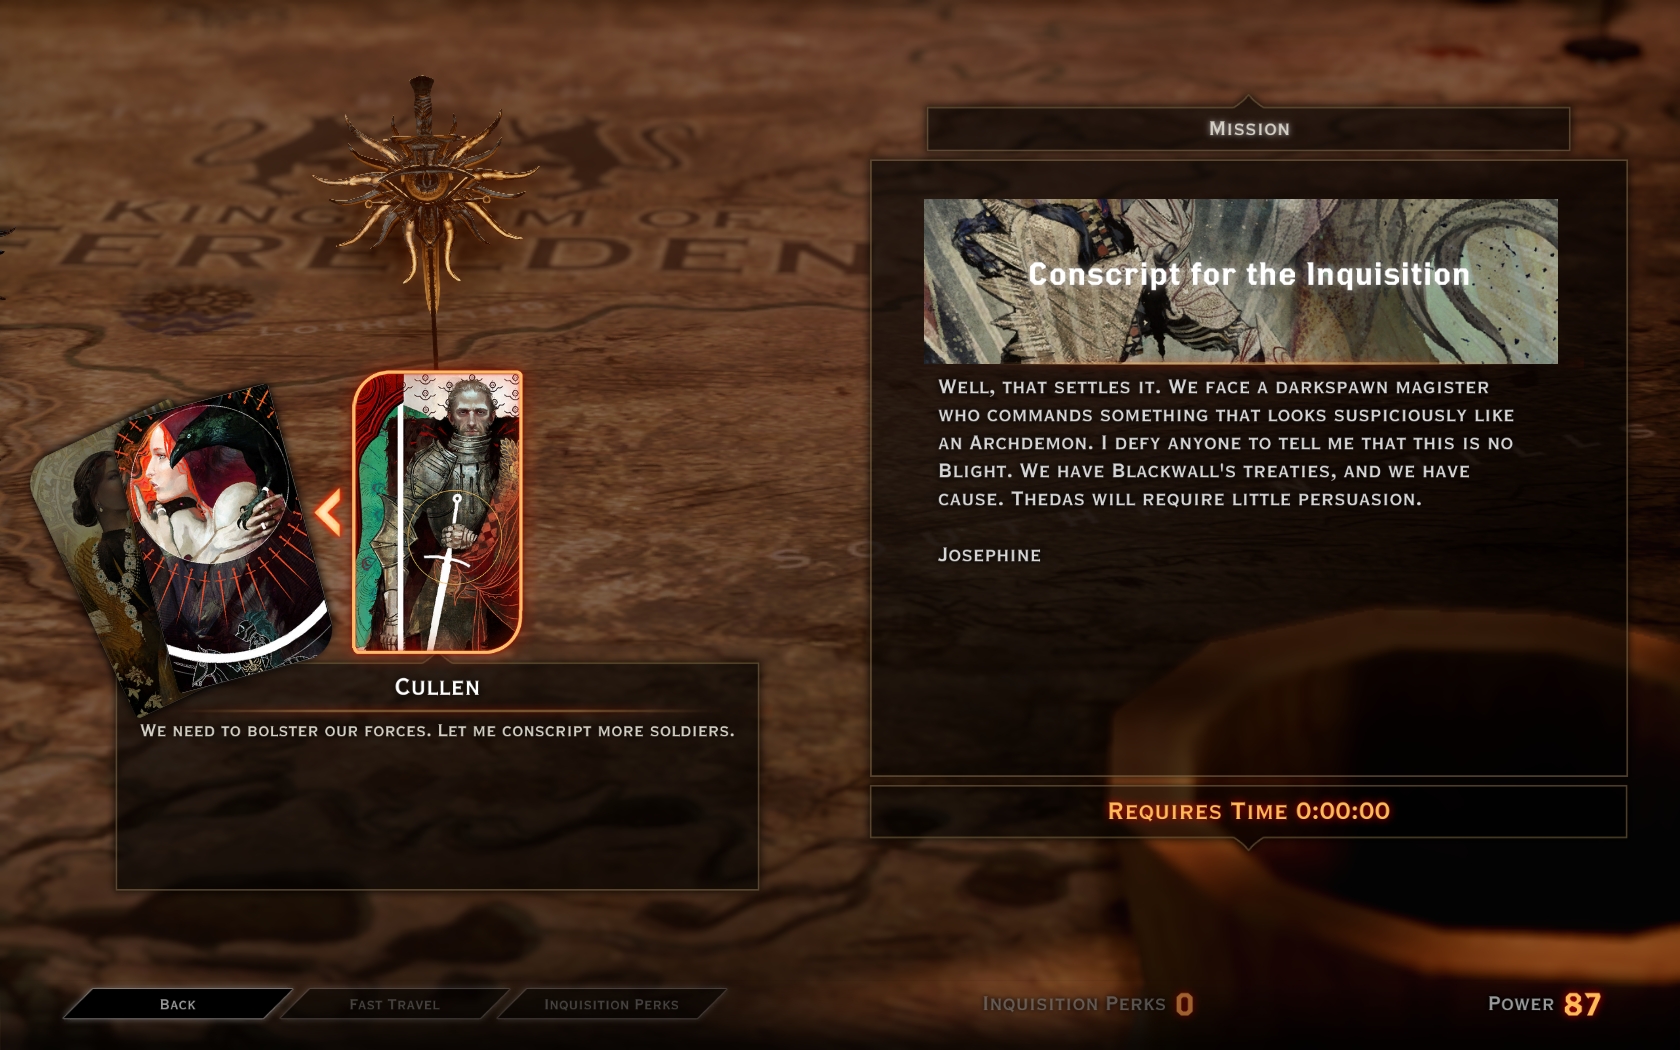 Dragon Age™ Inquisition How to Install Mods + Mods Manager Guide - Popular Mods - 152D83D